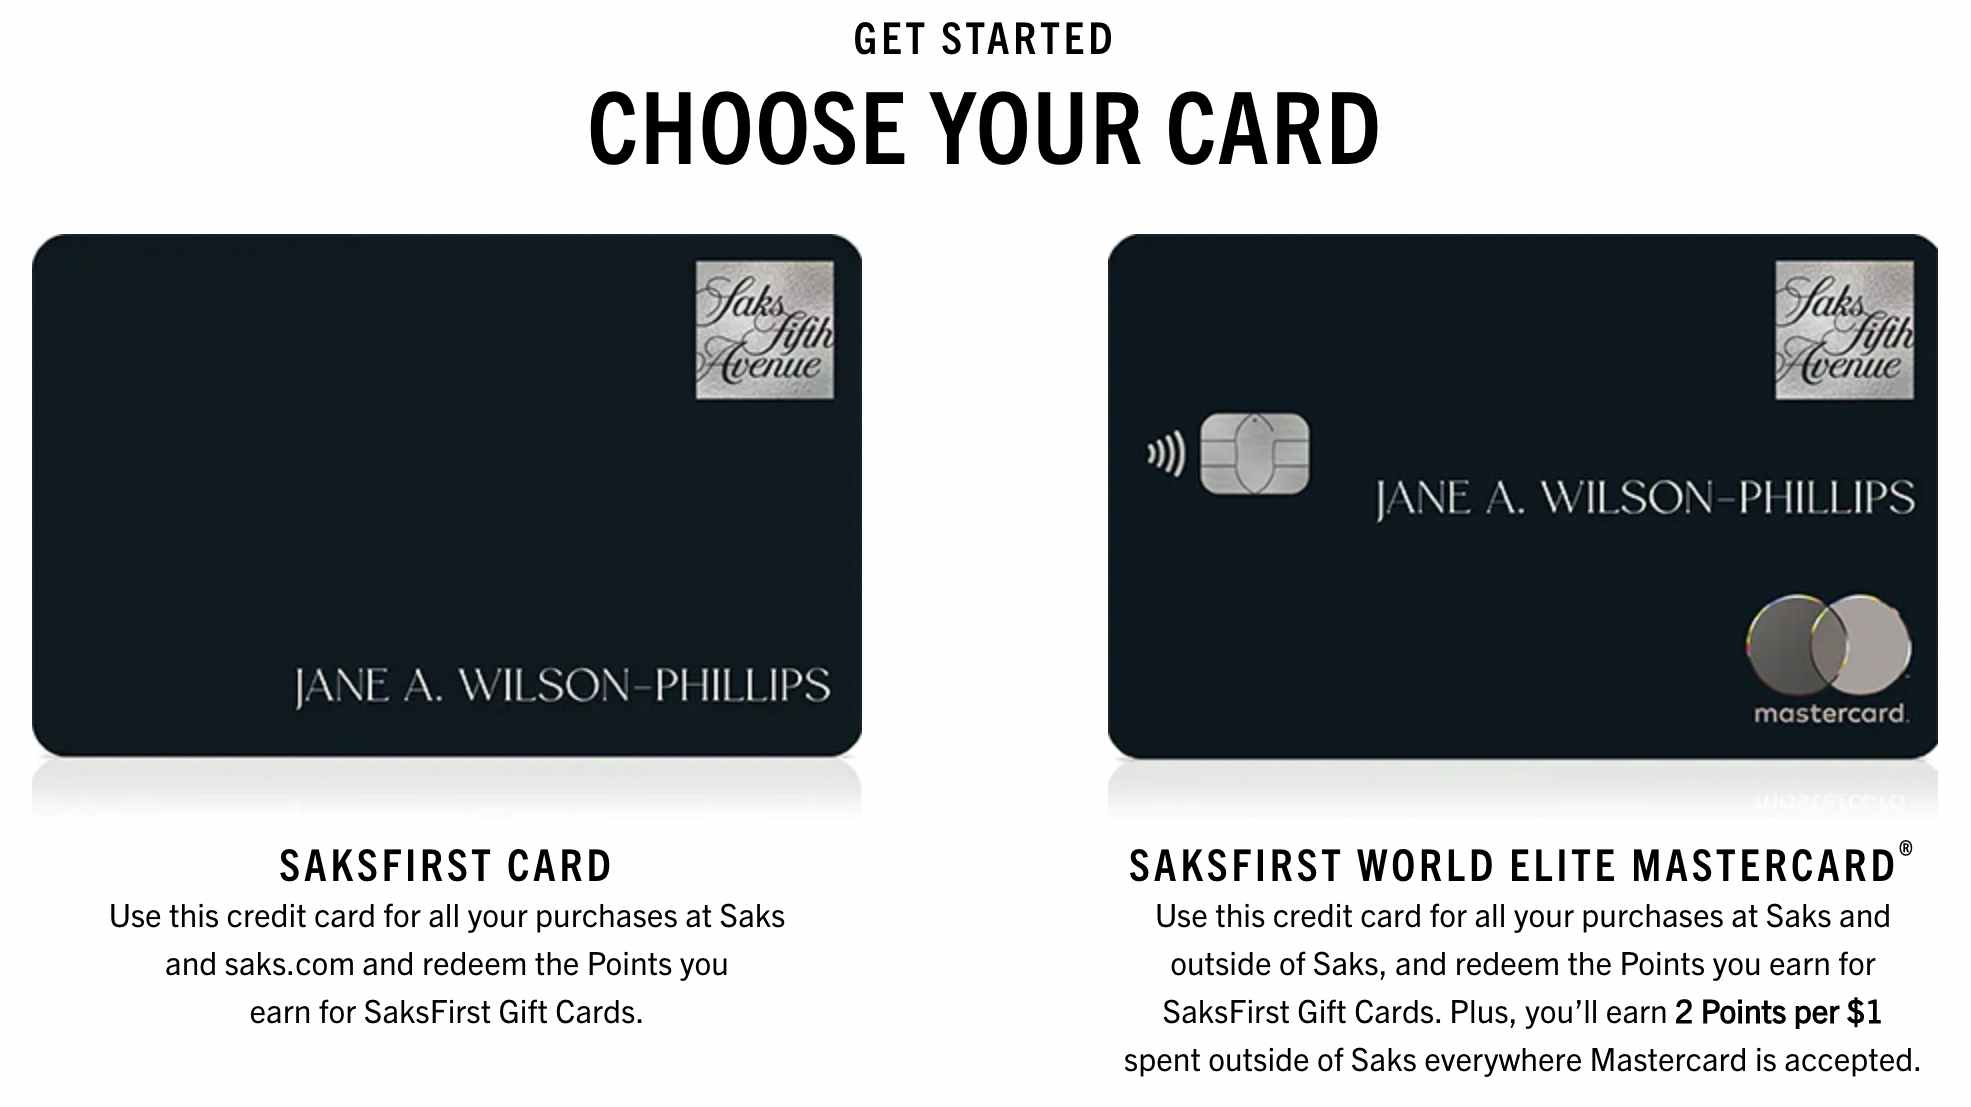 The credit card options for Saks Fifth Avenue